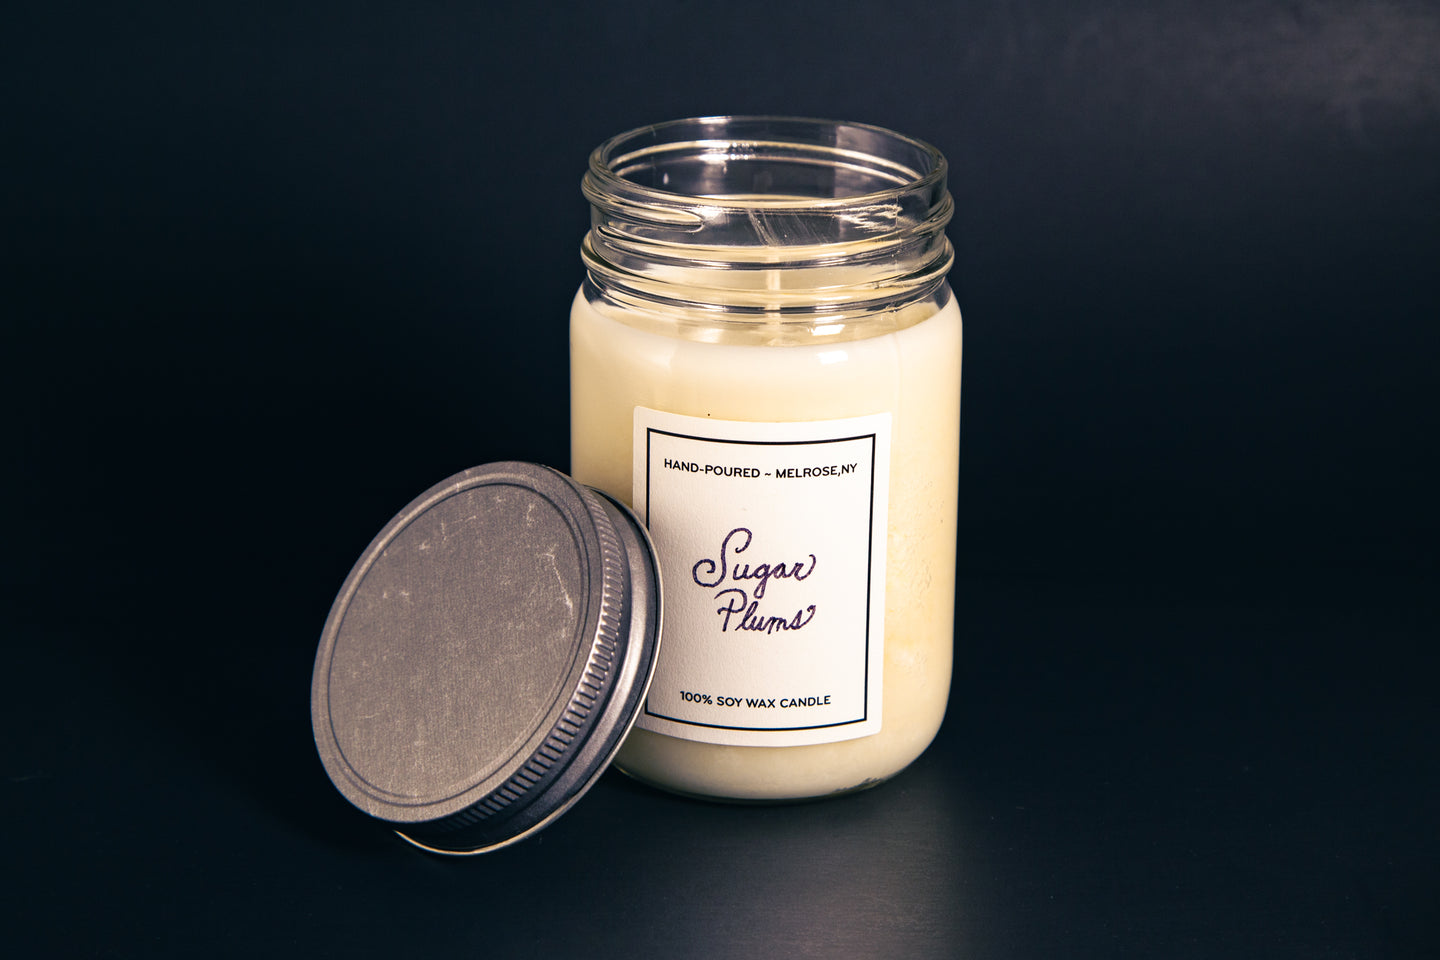 Sugar Plums Soy Candle